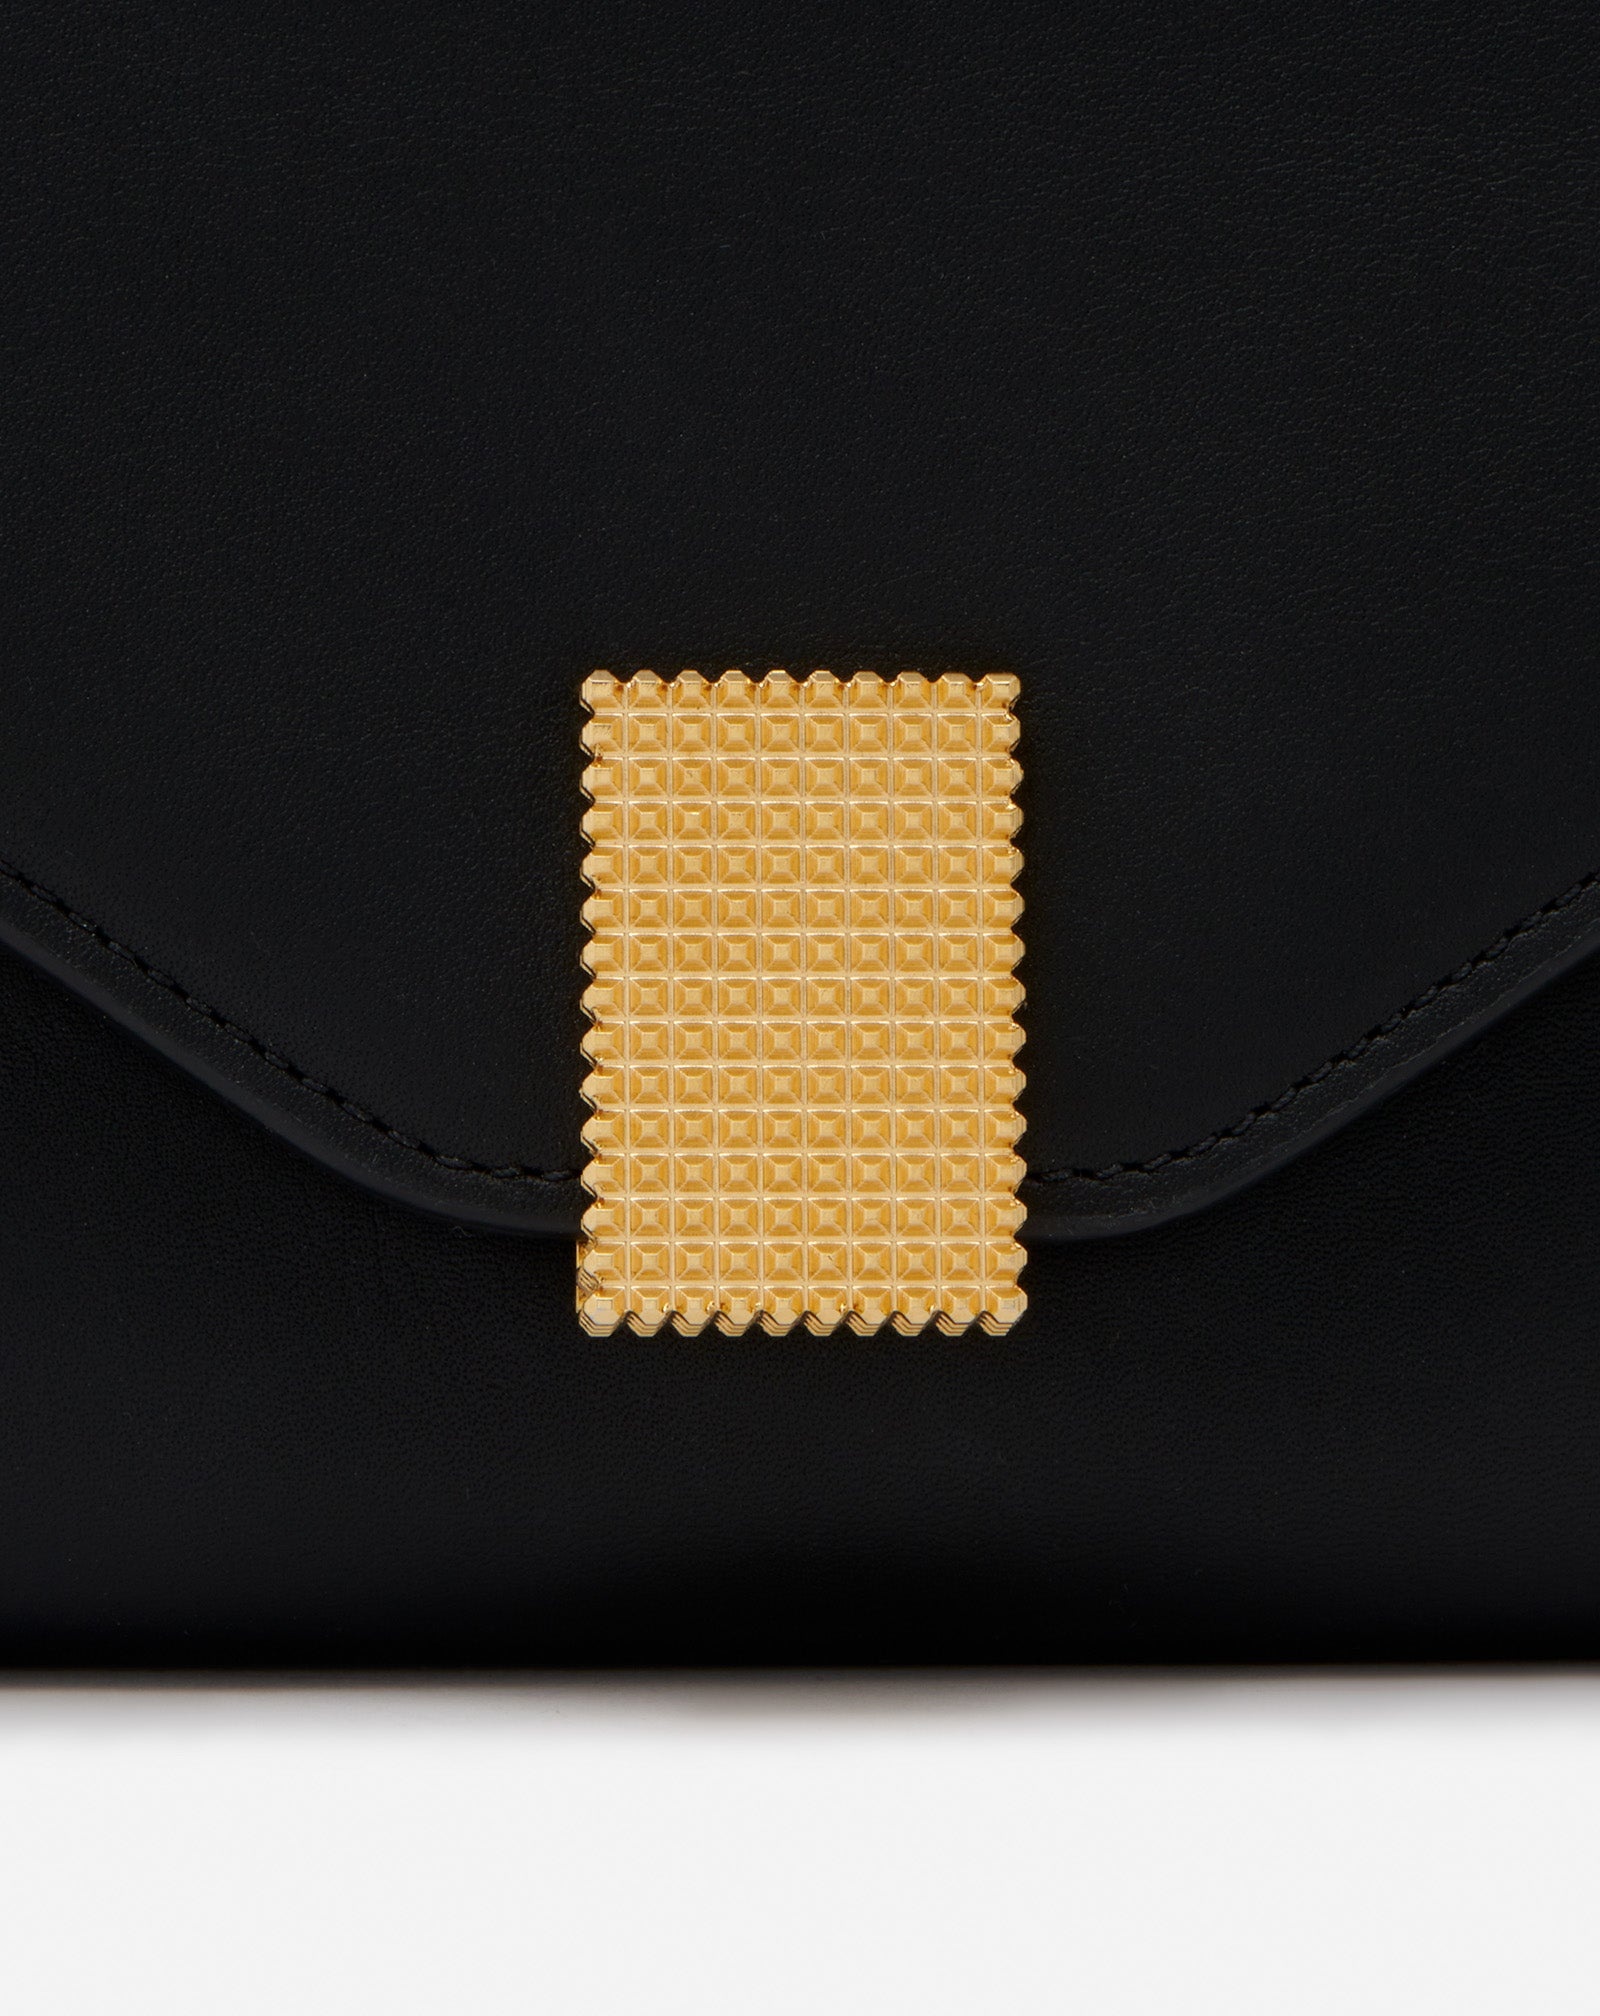 CONCERTO LEATHER CLUTCH - 3